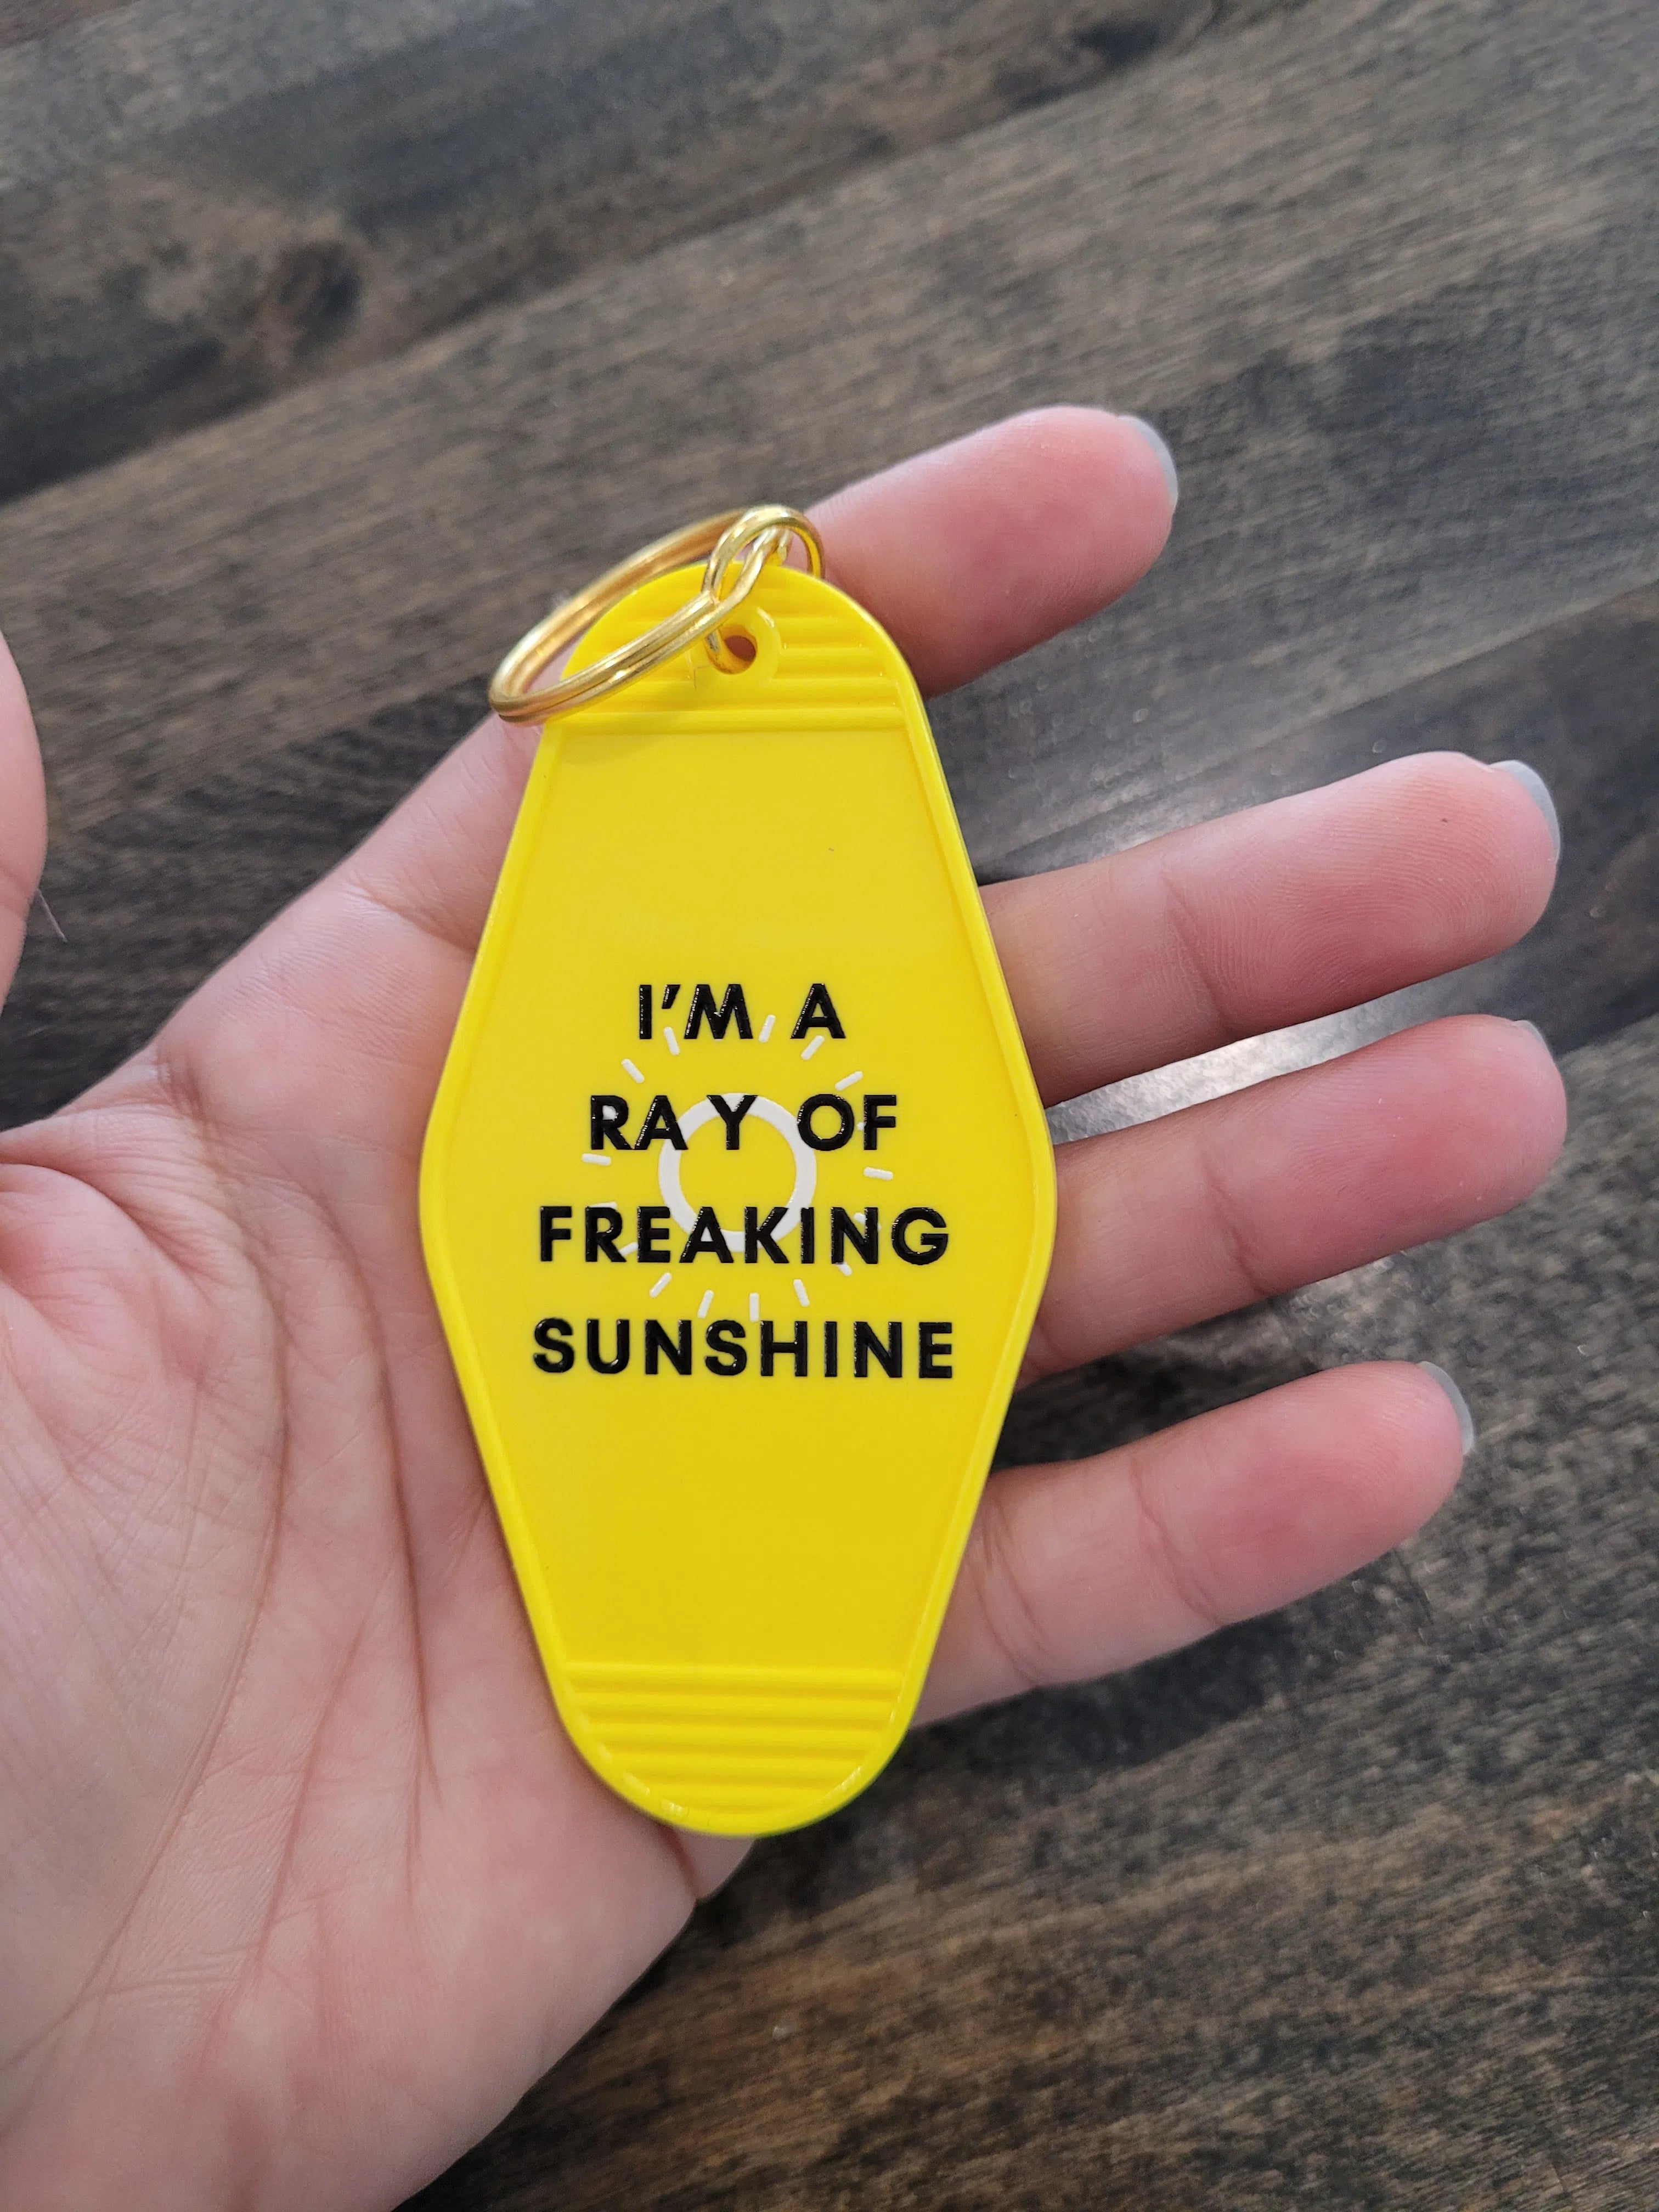 Shop Vintage Motel Keychain-Keychains at Ruby Joy Boutique, a Women's Clothing Store in Pickerington, Ohio